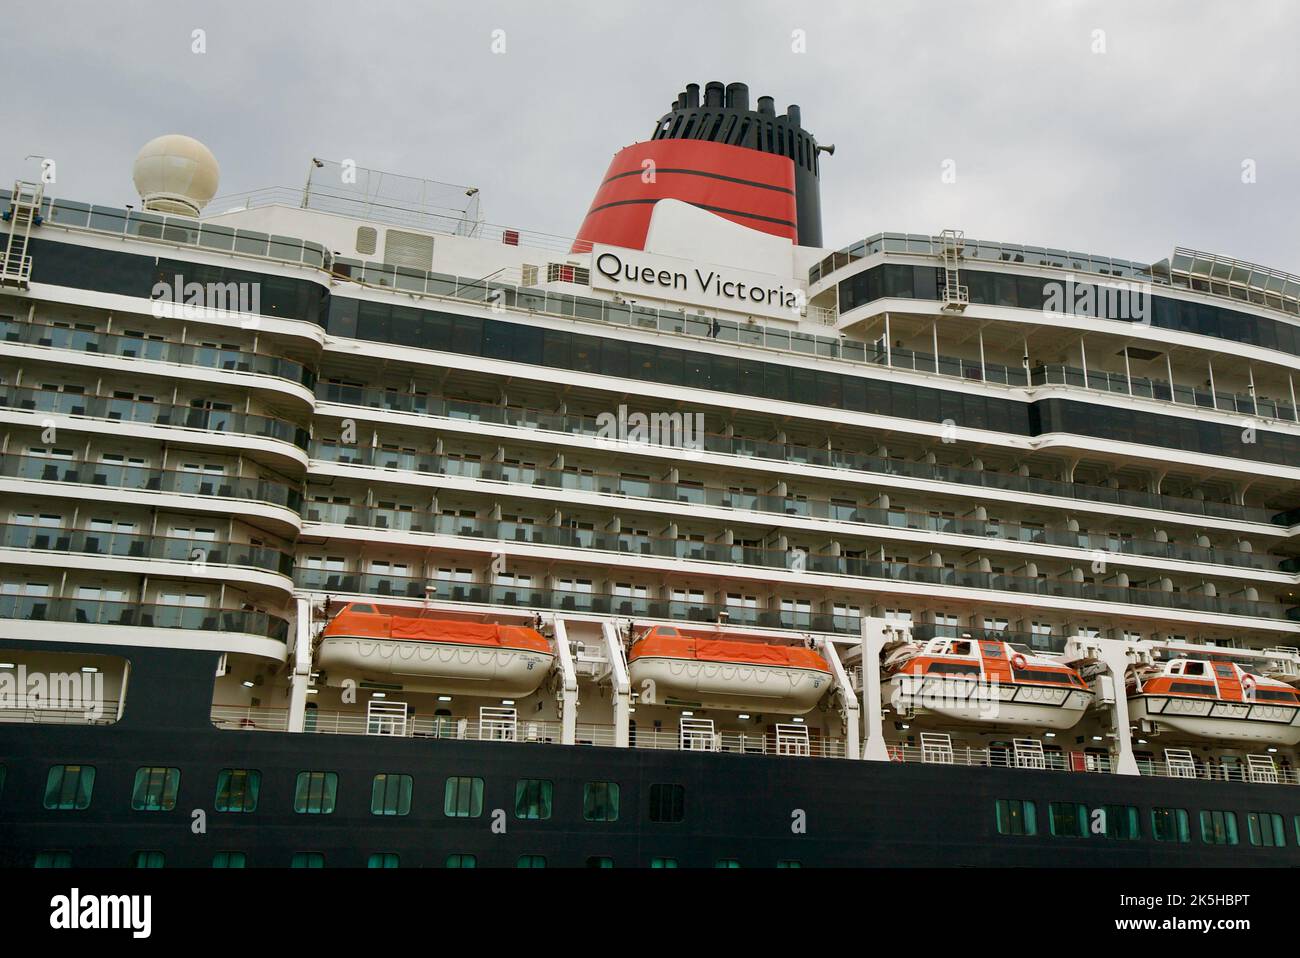 Side view of the Cunard Queen Victoria cruise ship, looking at the name plaque and the balconies and chimney. Stock Photo